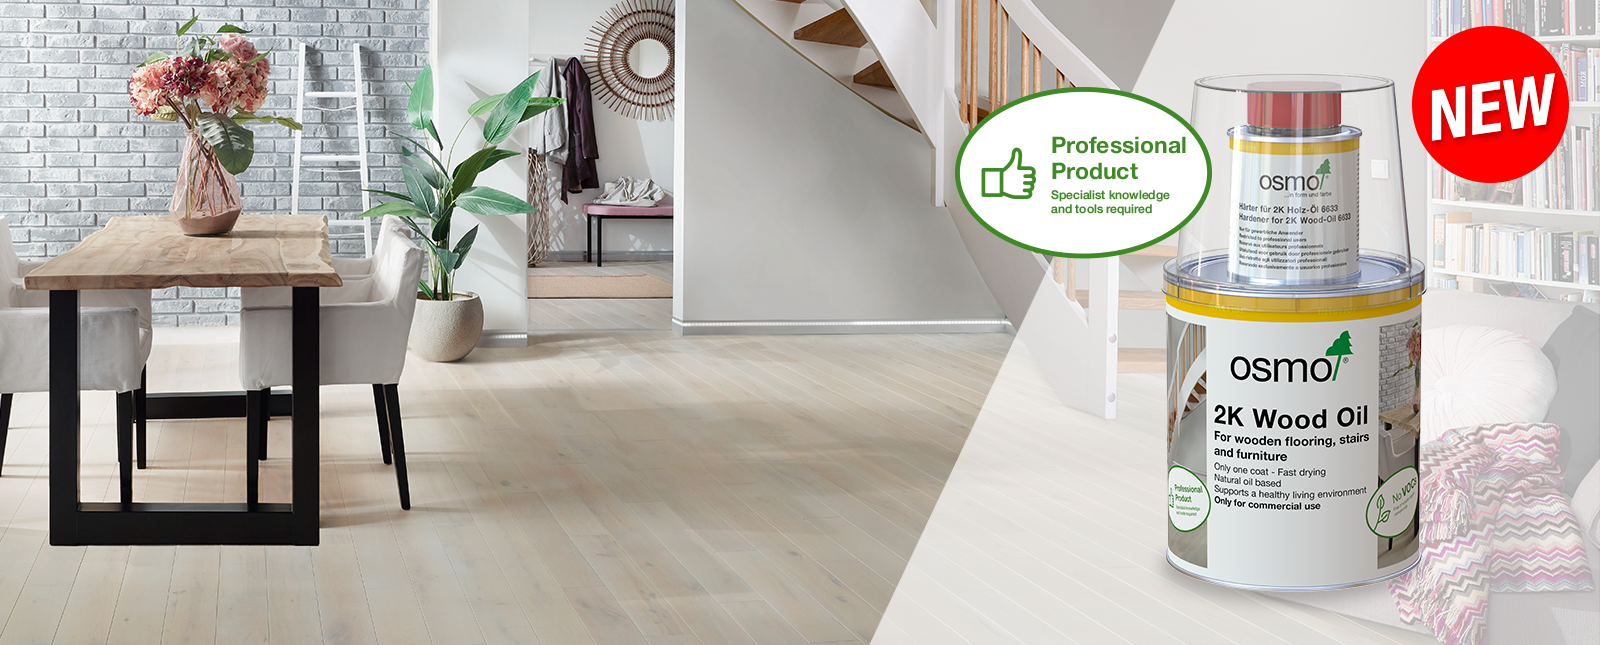 Osmo 2K Wood-Oil - a good care for long life floor. Details and colors here.